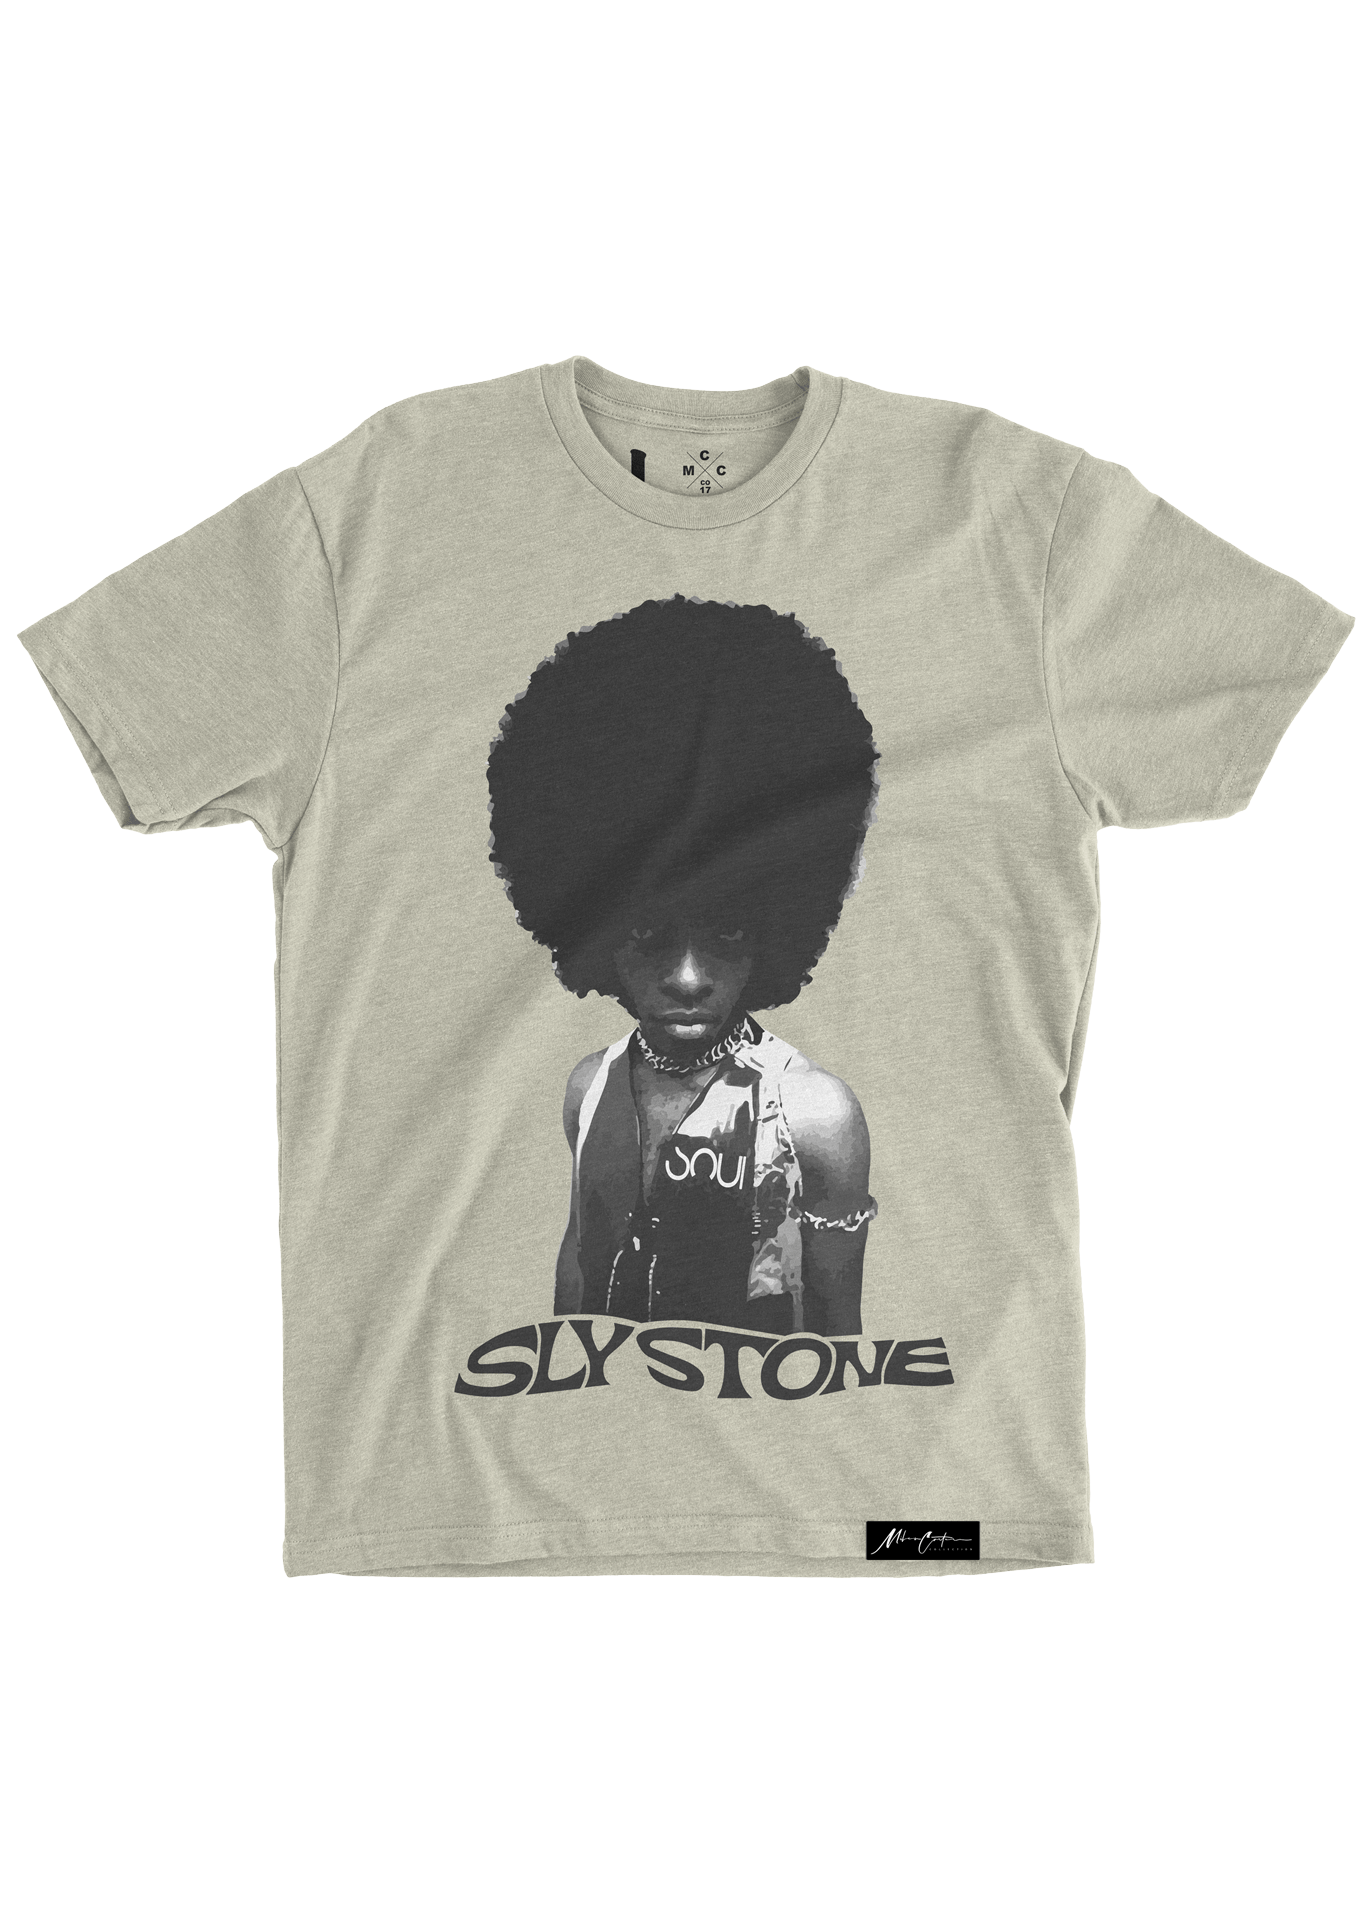 Sly Stone Everyday People | Carter – Miles Carter Designs